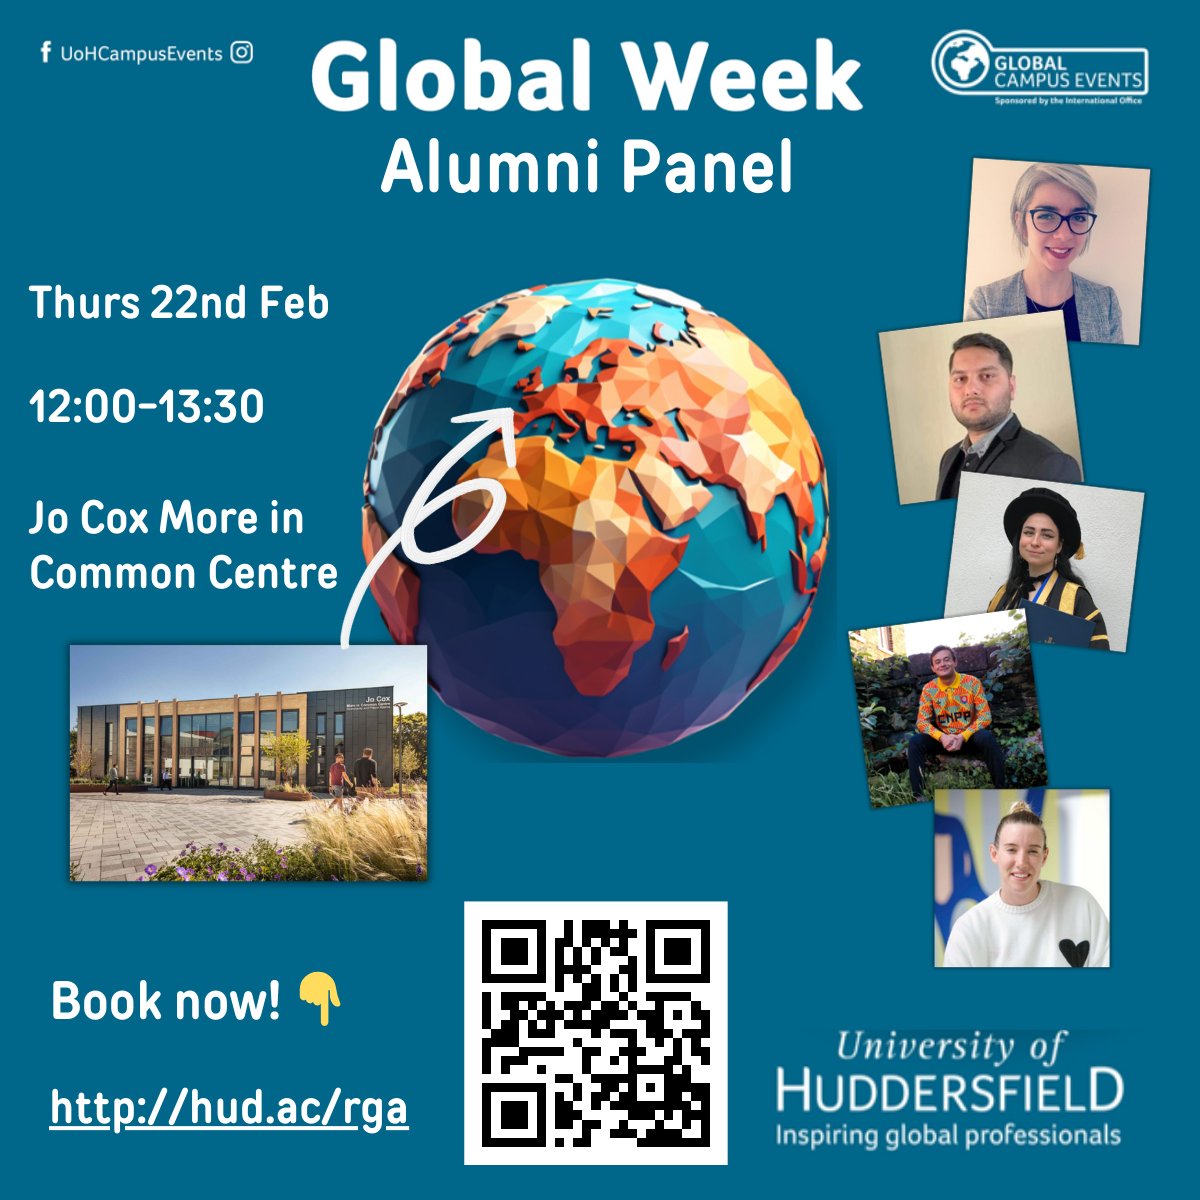 🌎 GLOBAL WEEK INCOMING! 🌍

Really looking forward to chairing this #Alumni panel as part of the celebrations for #GlobalWeek taking place next week at @HuddersfieldUni - come and hear our #HudGrads discuss how living, working and studying abroad has impacted their careers! 👇